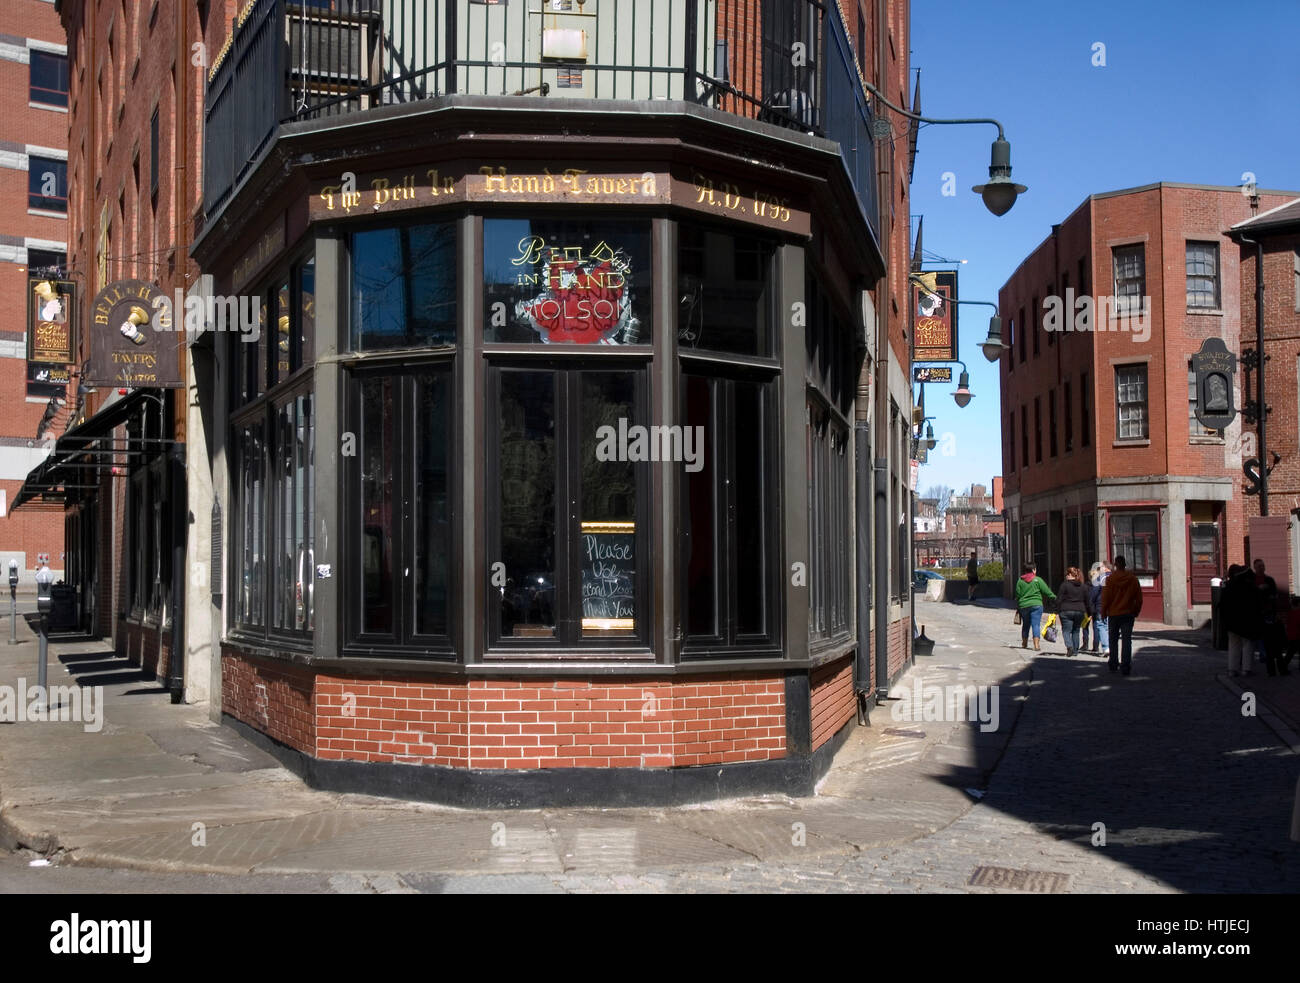 The Historic Bell in Hand Tavern - Downtown Boston - America's oldest tavern Stock Photo